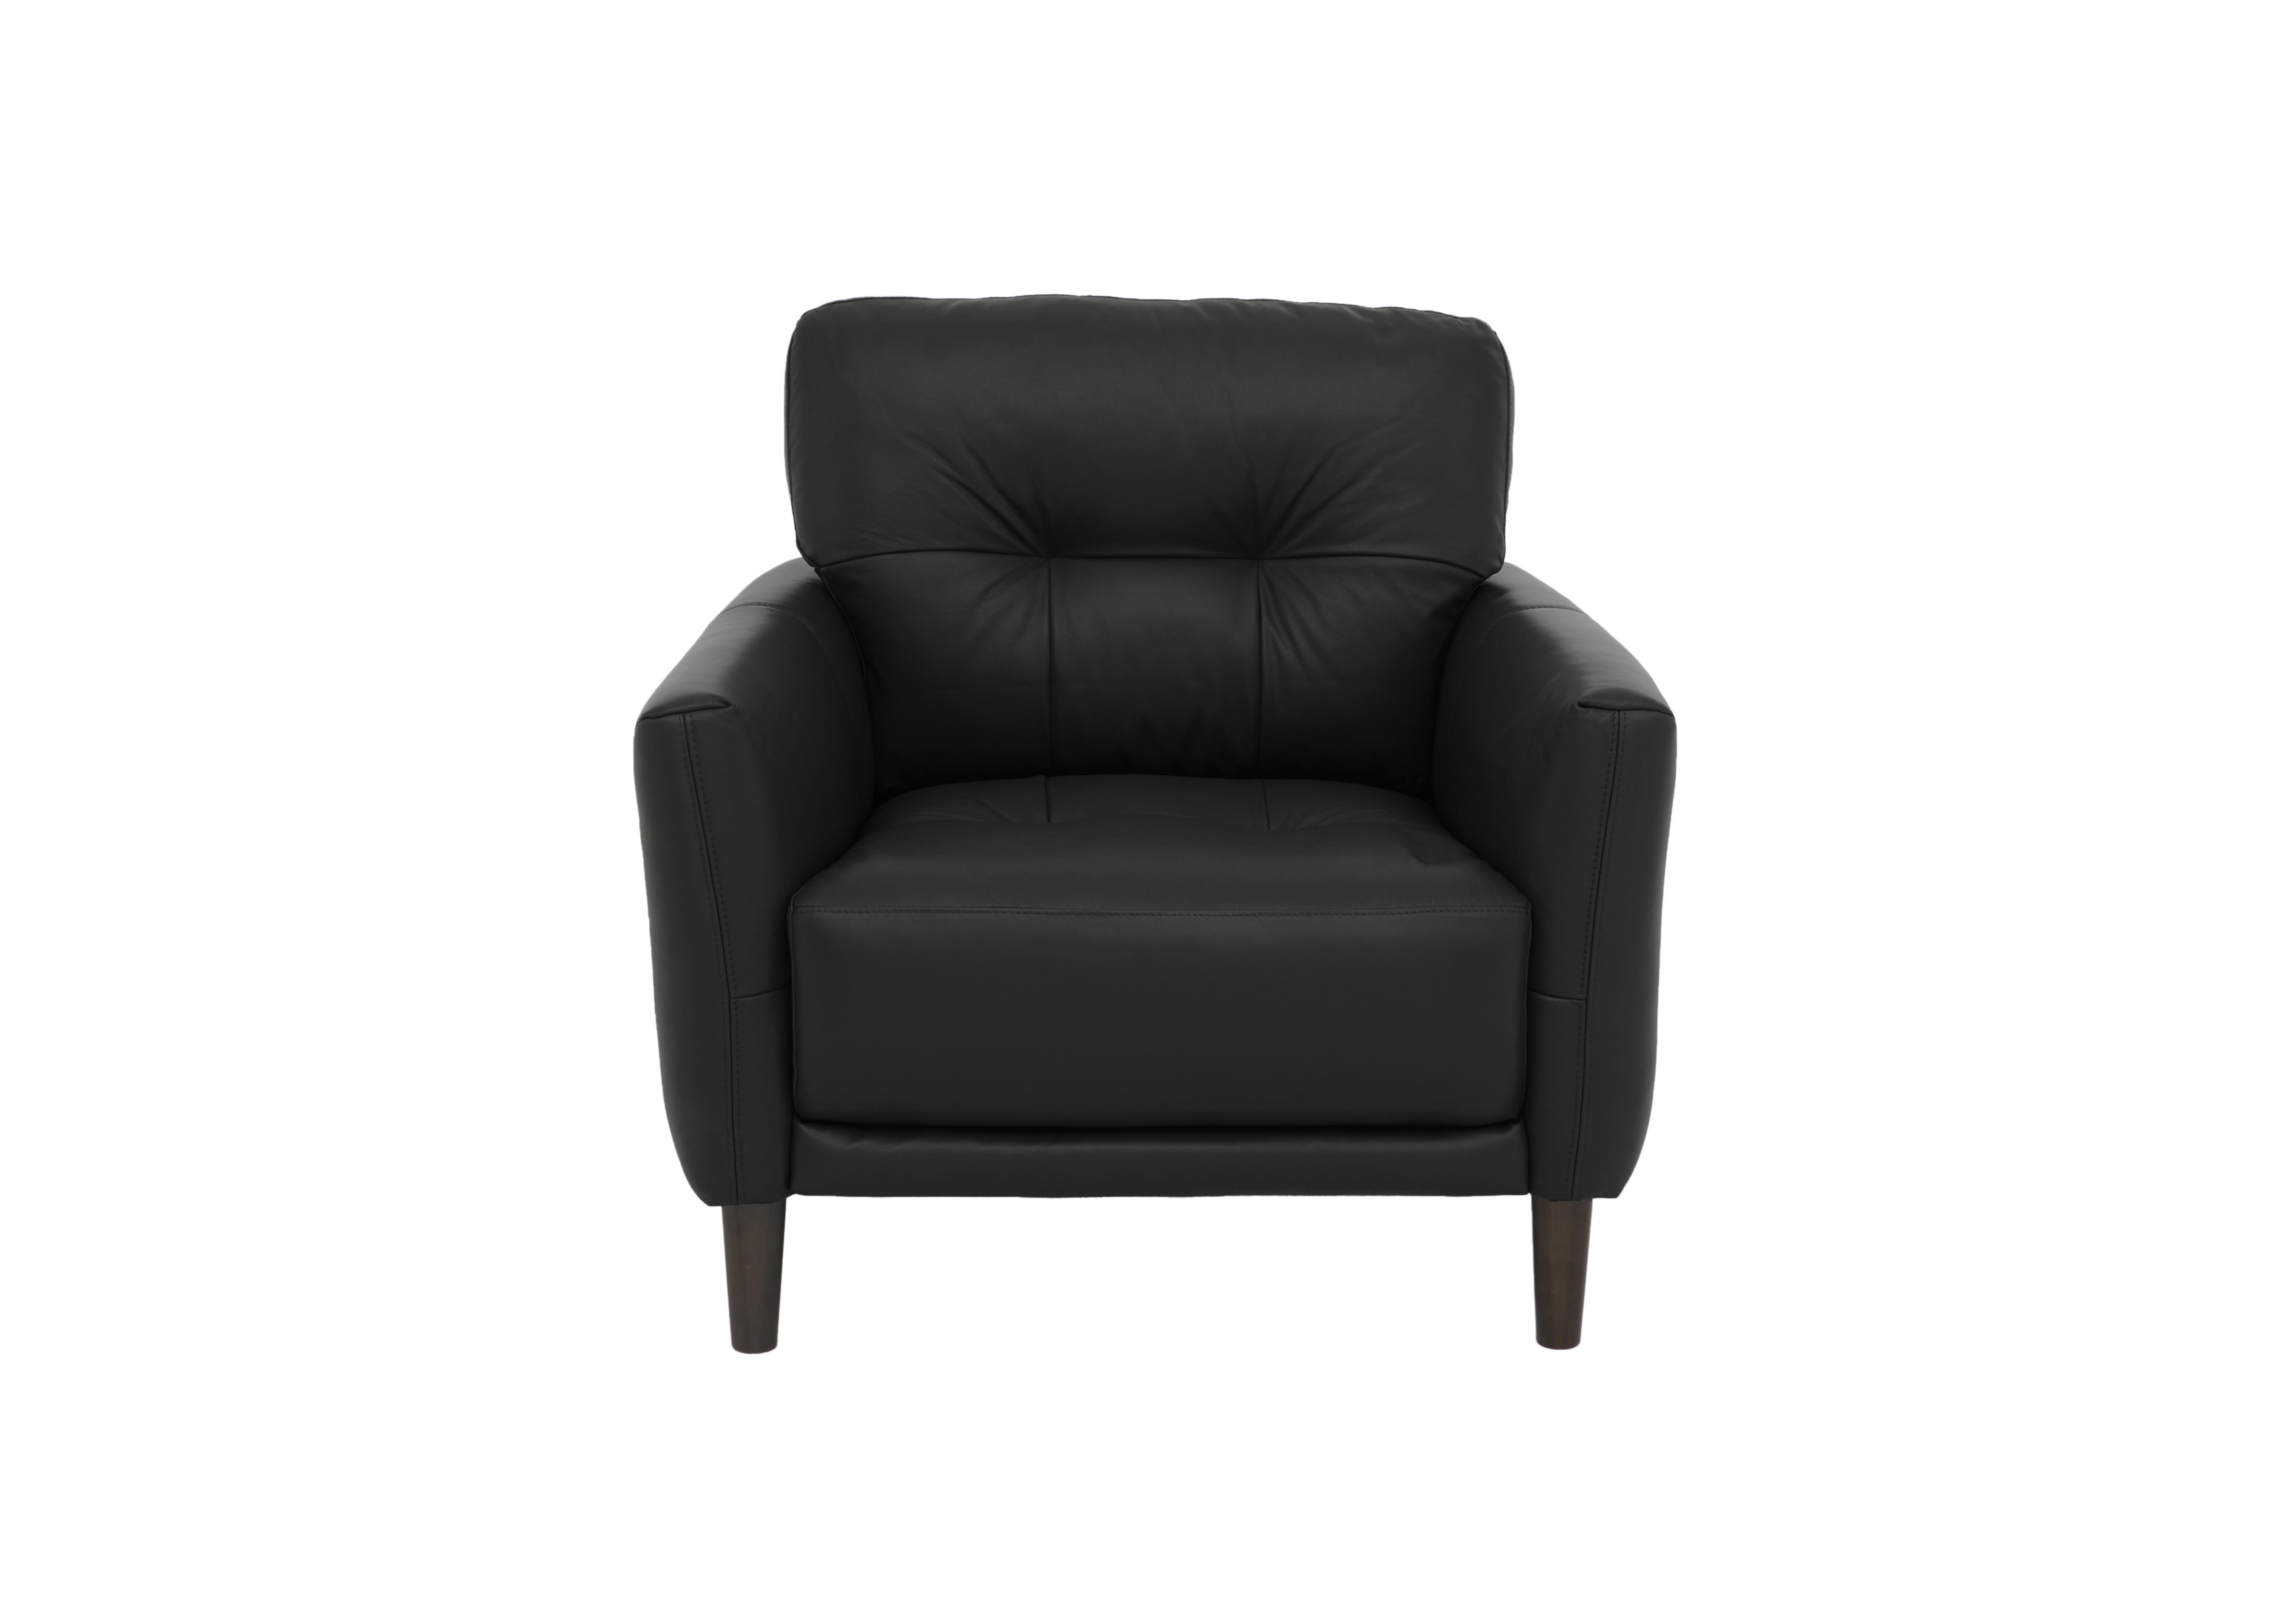 Uno Leather Chair in Bv-3500 Classic Black on Furniture Village